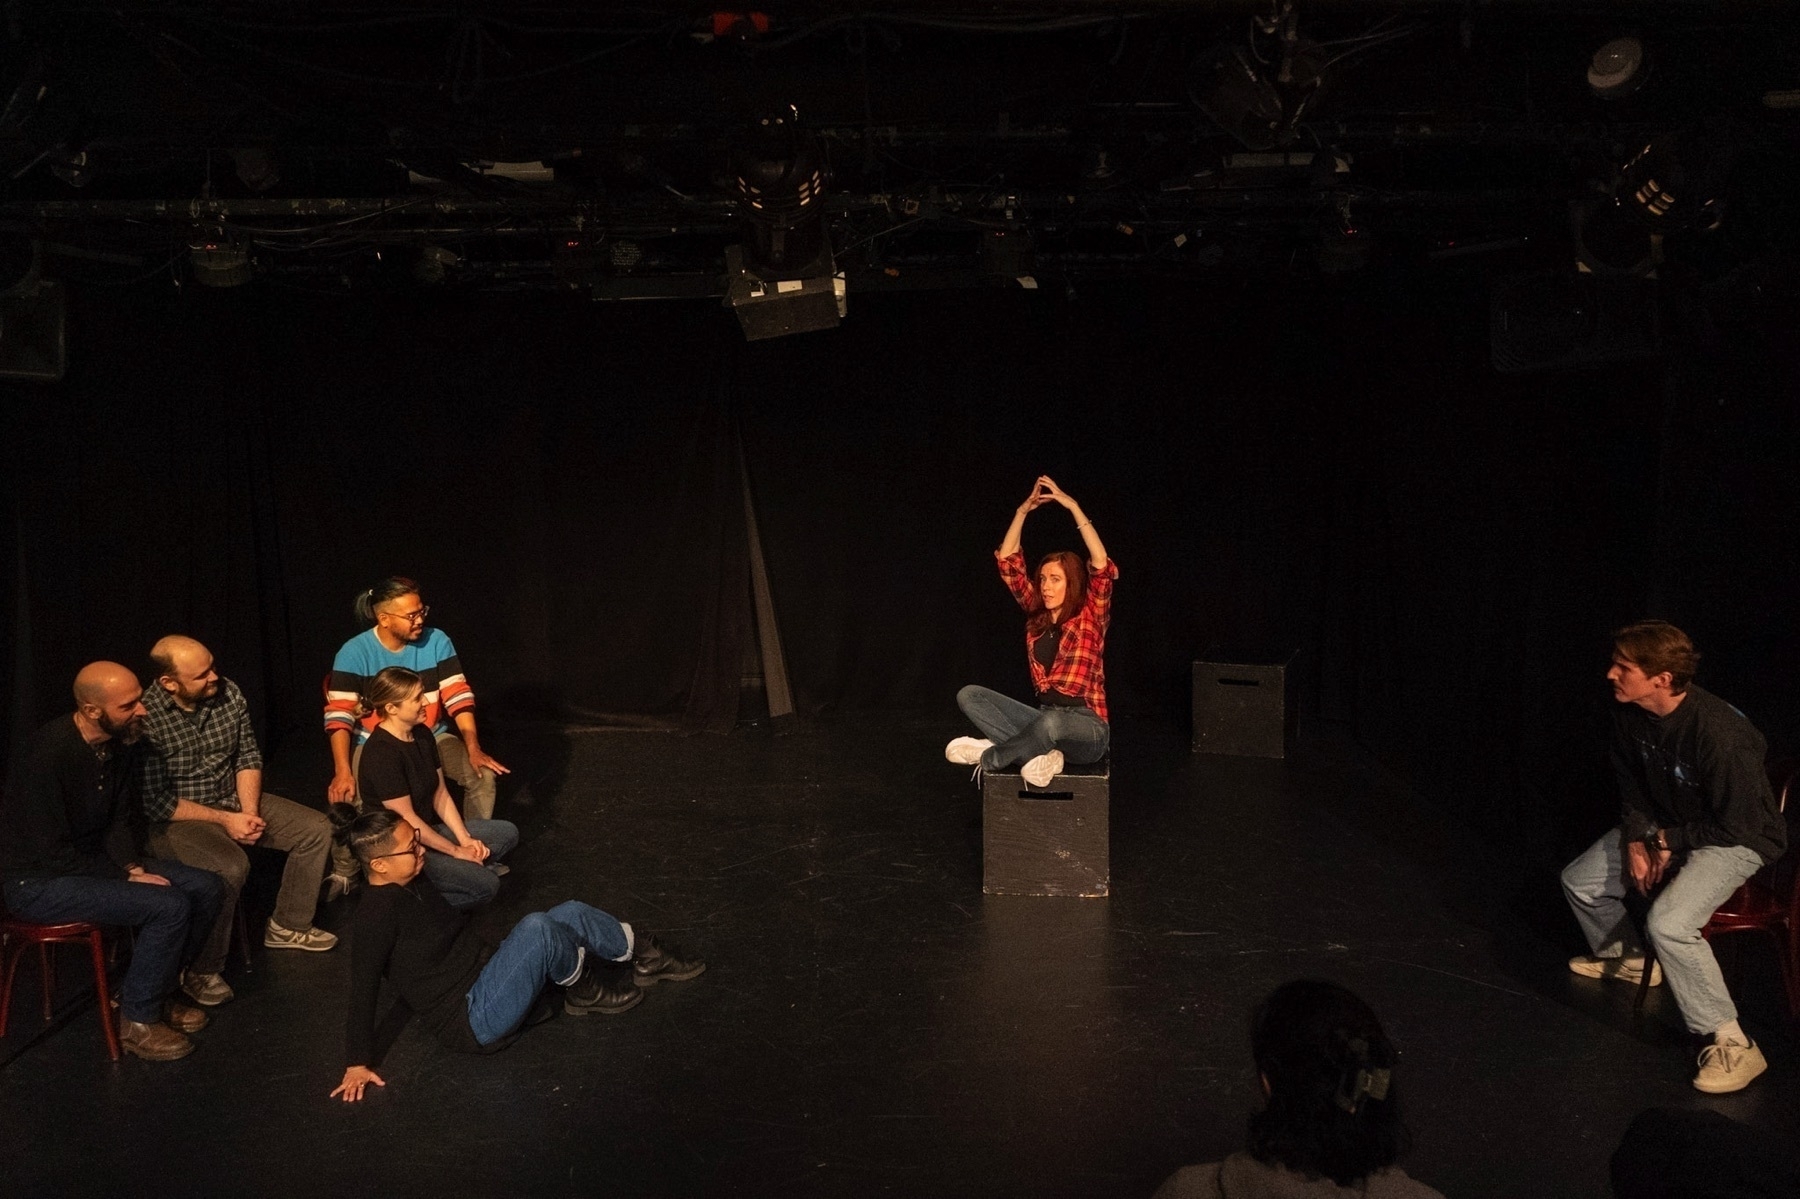 On a sparsely decorated stage, a group of seven people appears to be engaged in a theater workshop or improvisation scene. A woman in a red plaid shirt is perched on a black box, forming a peak with her hands above her head, possibly mimicking a mountain or roof. To her left, a man is squatting with his hands on his thighs, looking towards her. On the left side of the image, five people are seated or lying on the stage, with some looking toward the woman on the box. They seem to be attentive and possibly reacting to her action. The stage is simply set with a black backdrop and stage lighting equipment visible overhead. The audience perspective is from the back of the room, with the back of an audience member's head in the foreground.